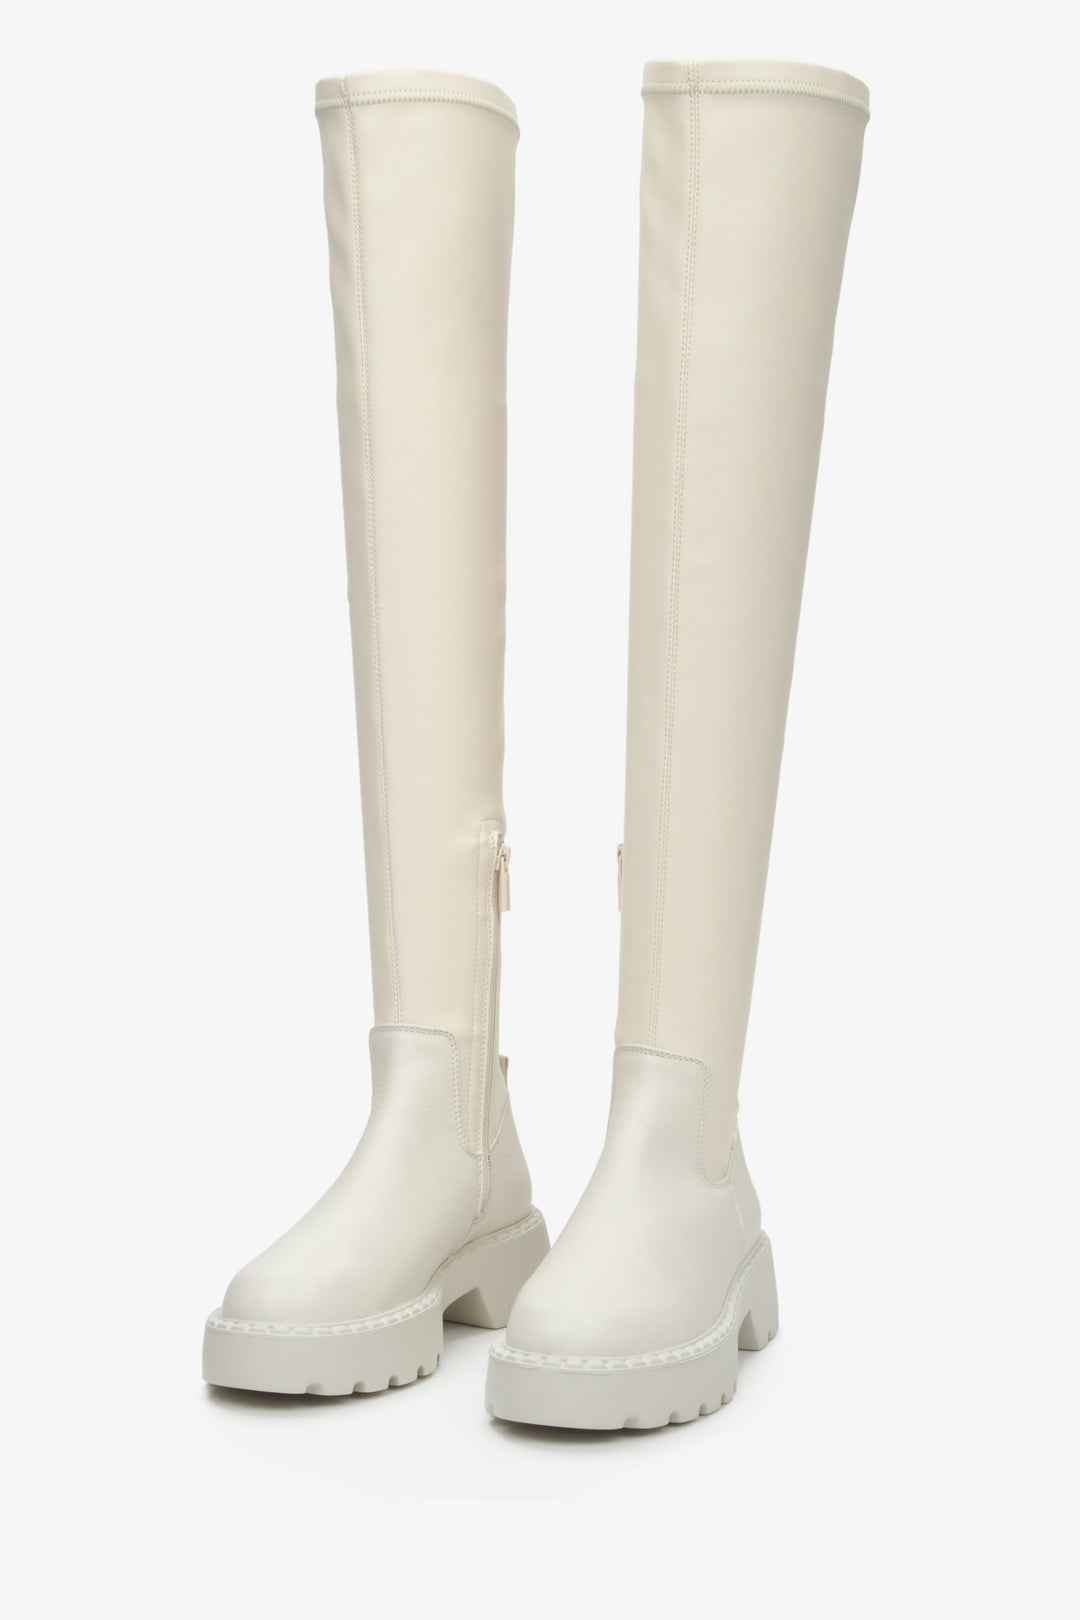 Women's high boots in light beige Estro - close-up on the front of the model.